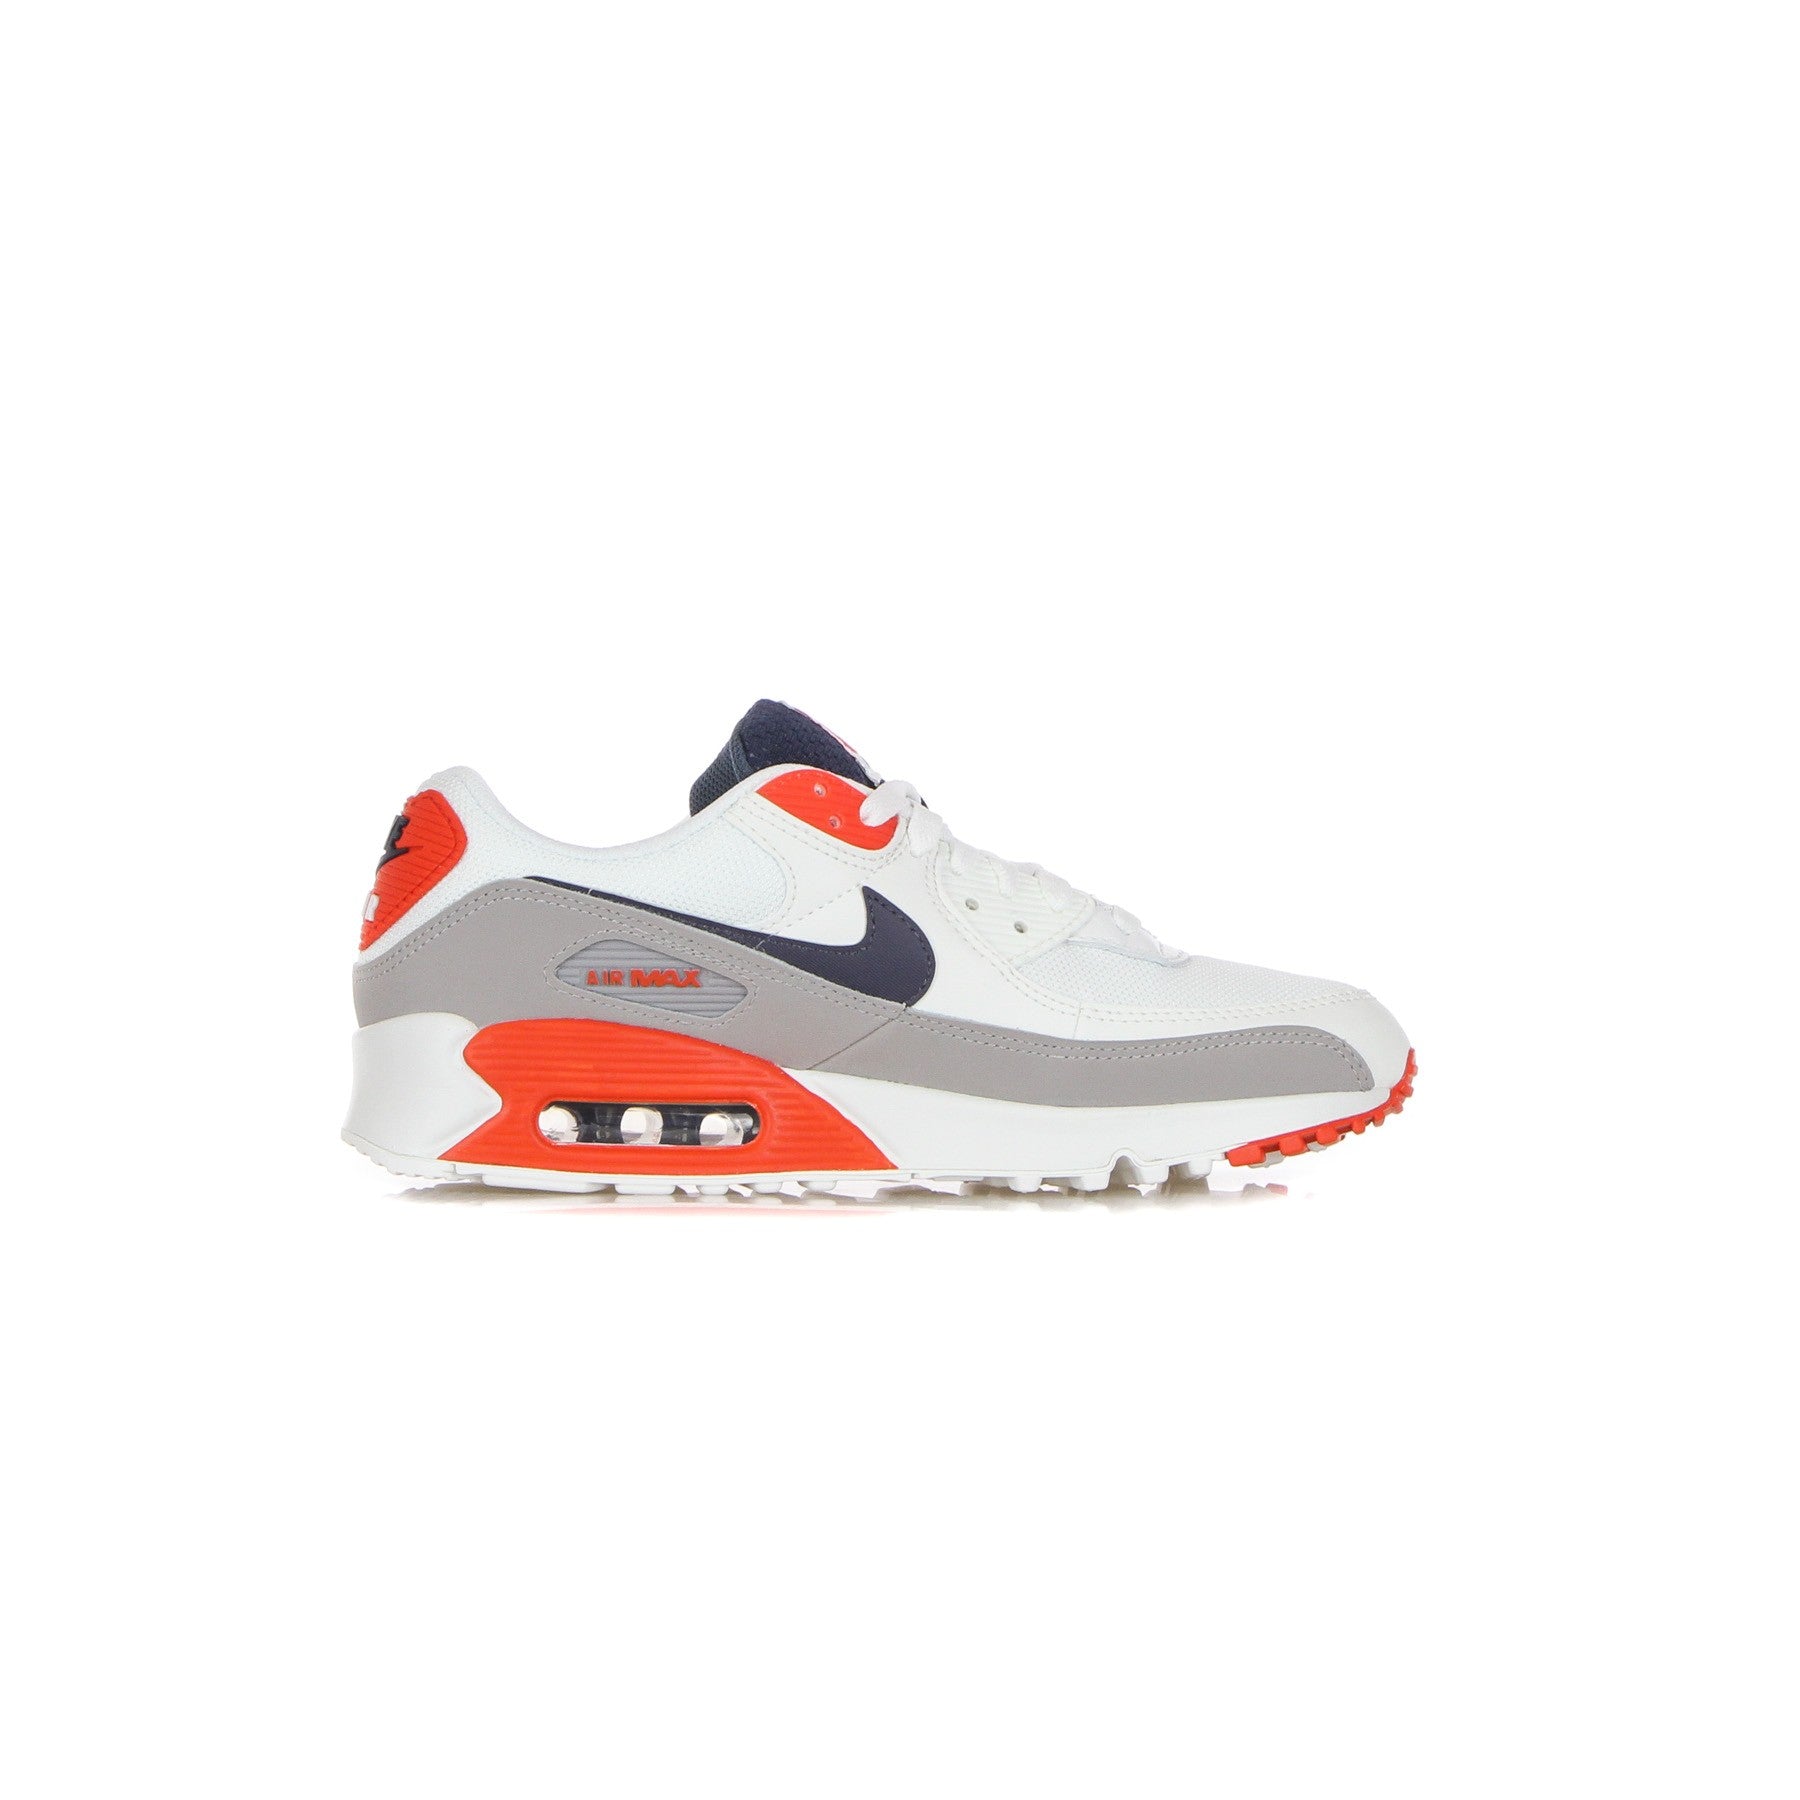 Air Max 90 Summit White/thunder Blue/cement Gray Men's Low Shoe